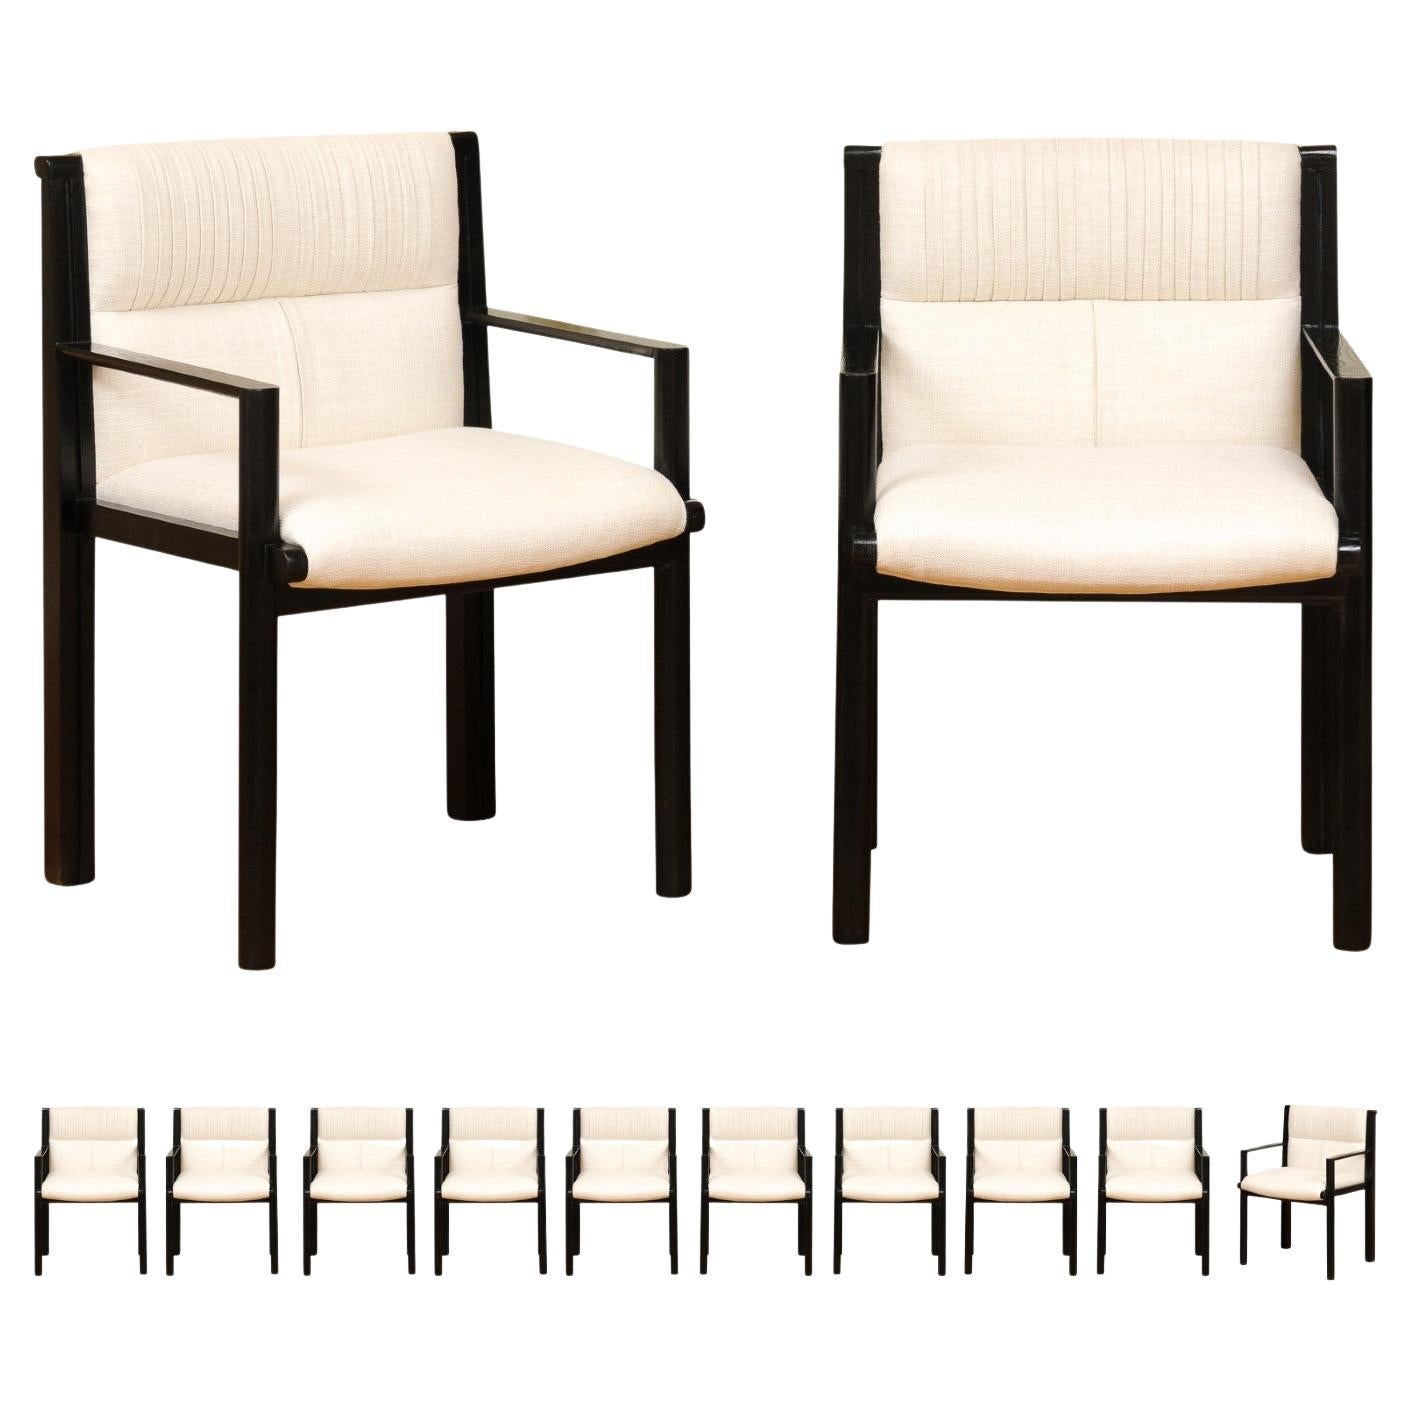 ALL ARMS- Breathtaking Set of 12 Cerused Oak Dining Chairs by John Saladino For Sale